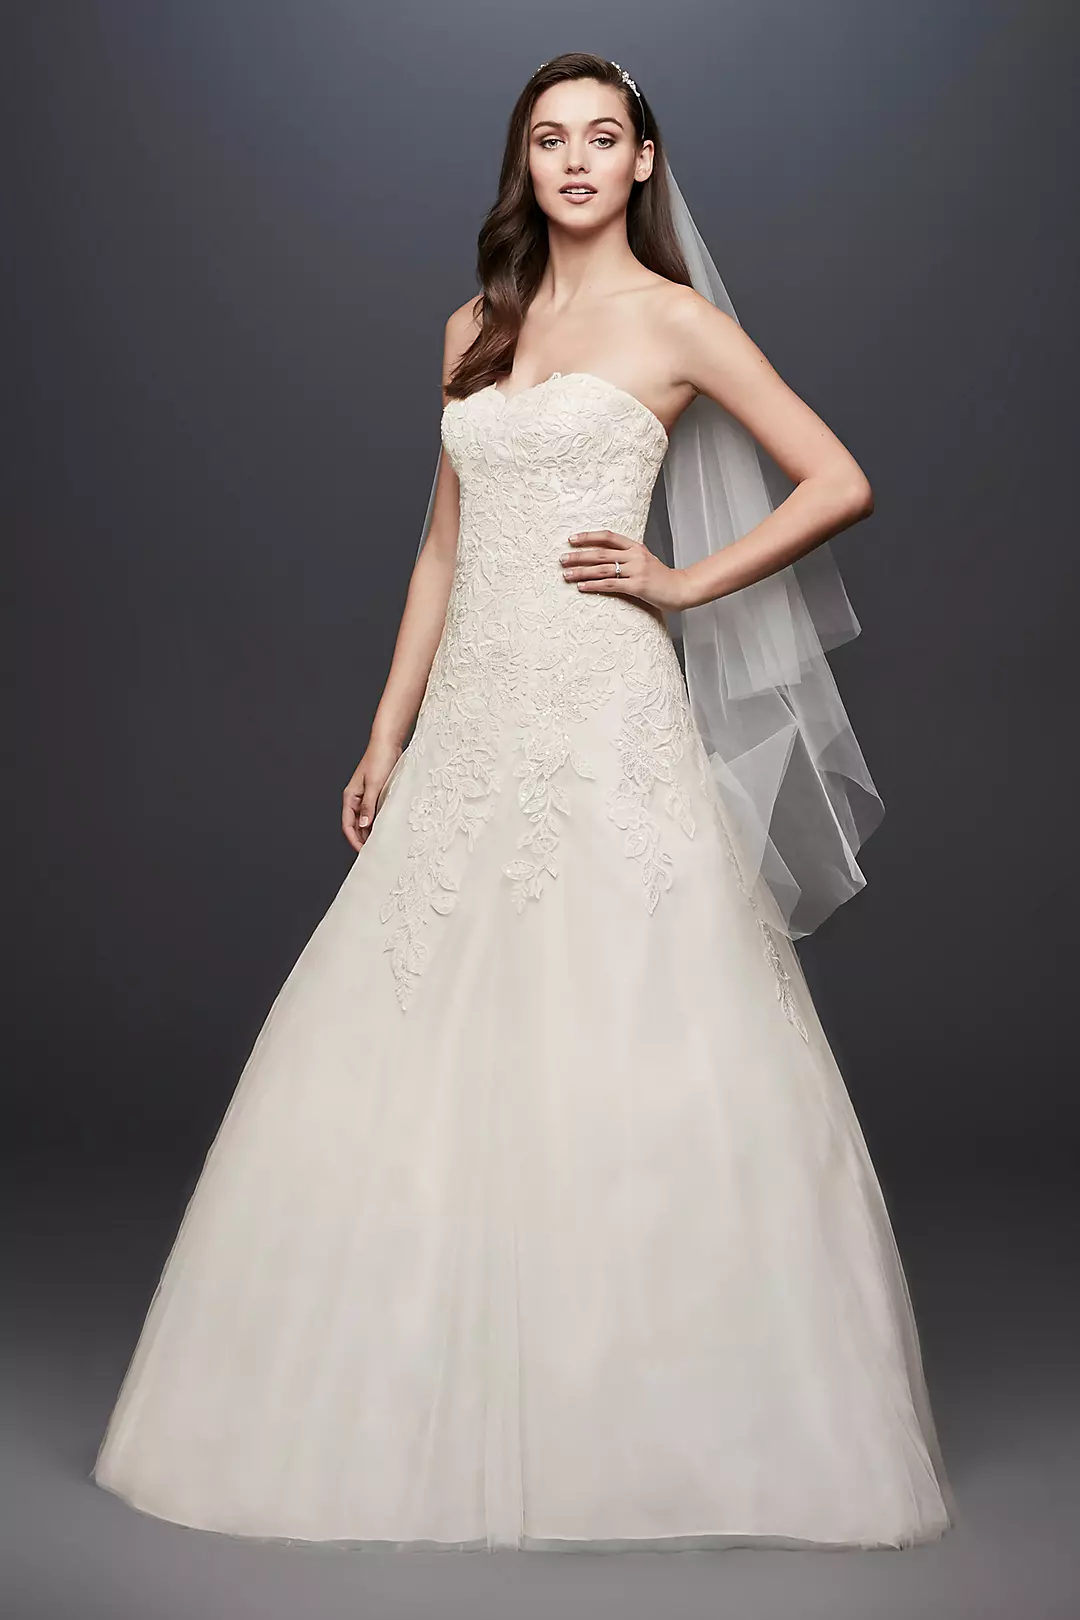 Soft Tulle Wedding Dress with Leaf Lace Applique Image